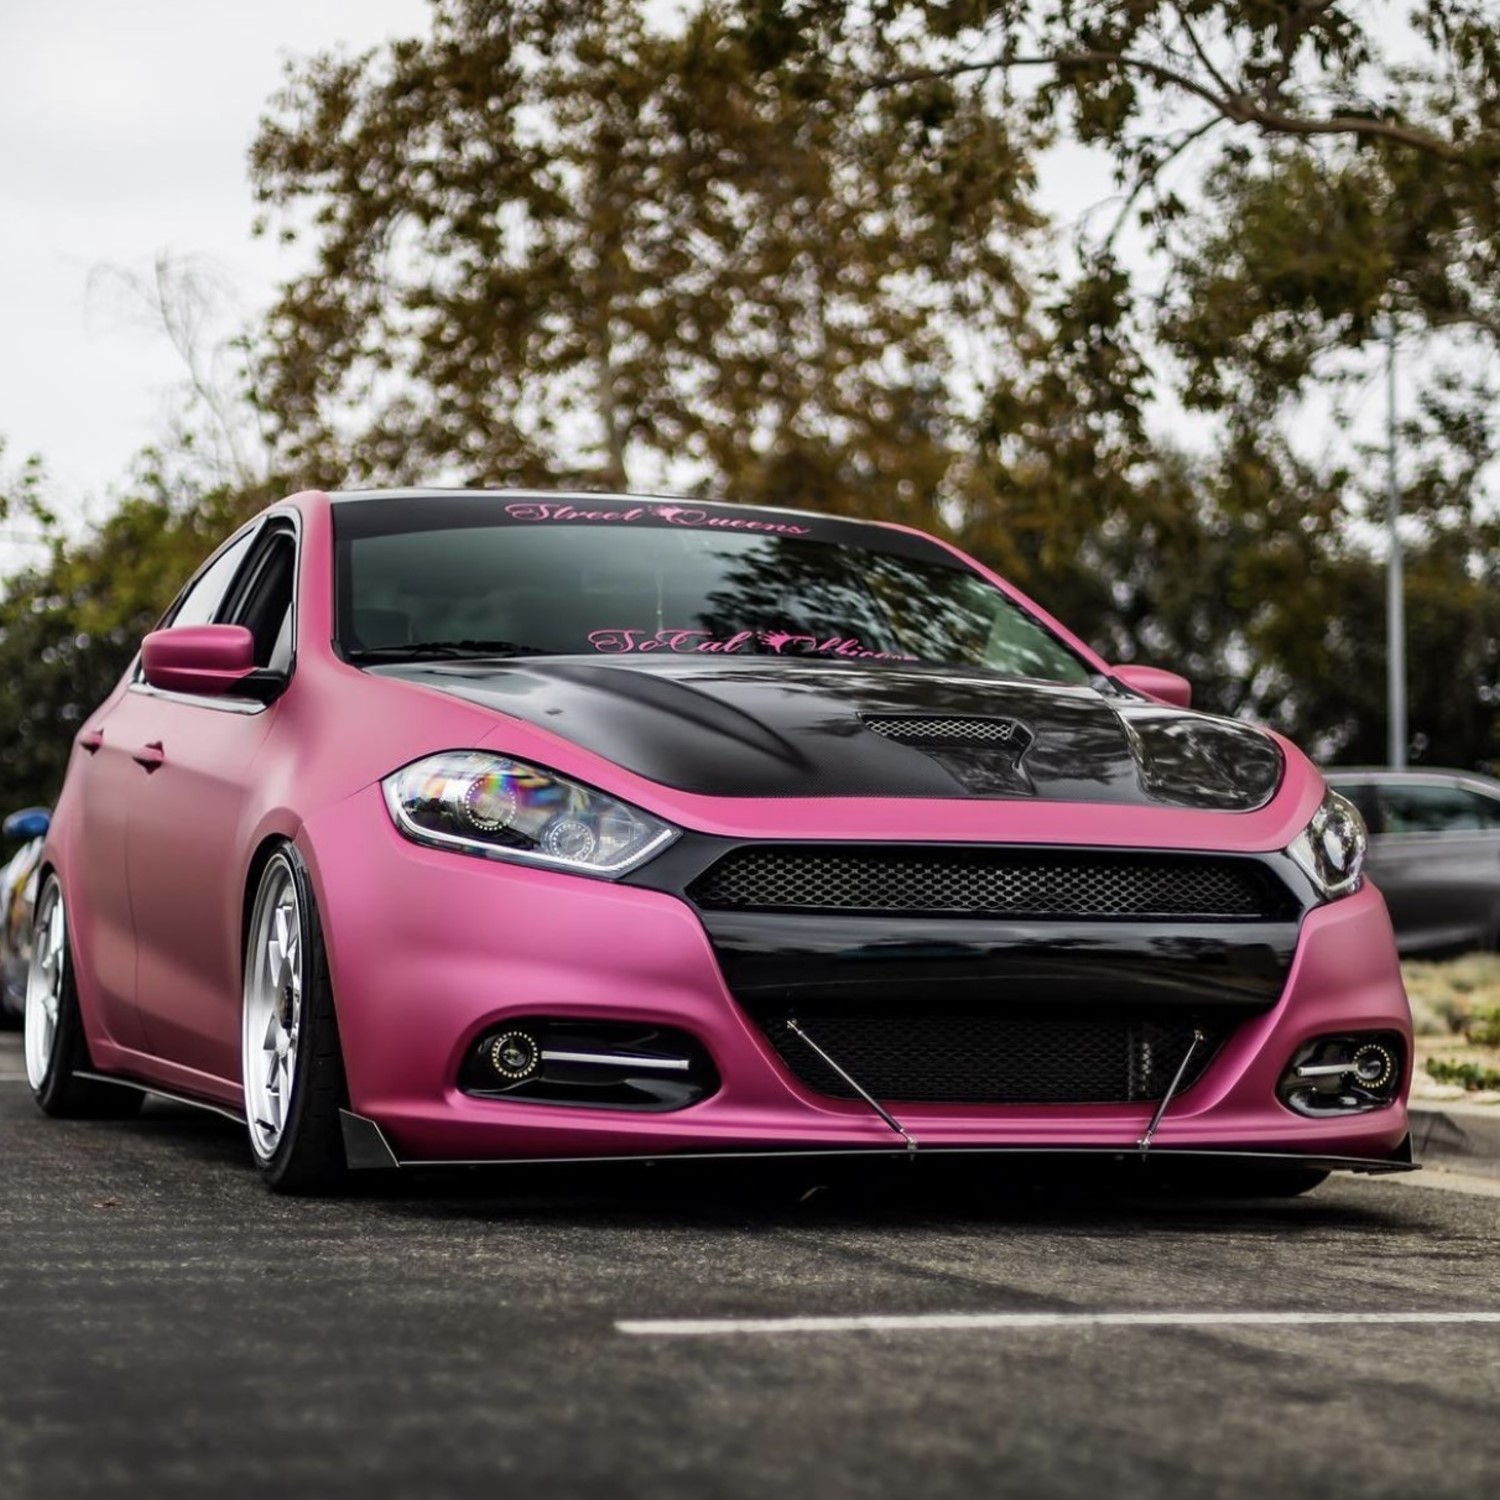 From Stock to Stunning: Custom Grilles and Styling Upgrades for the Dodge Dart